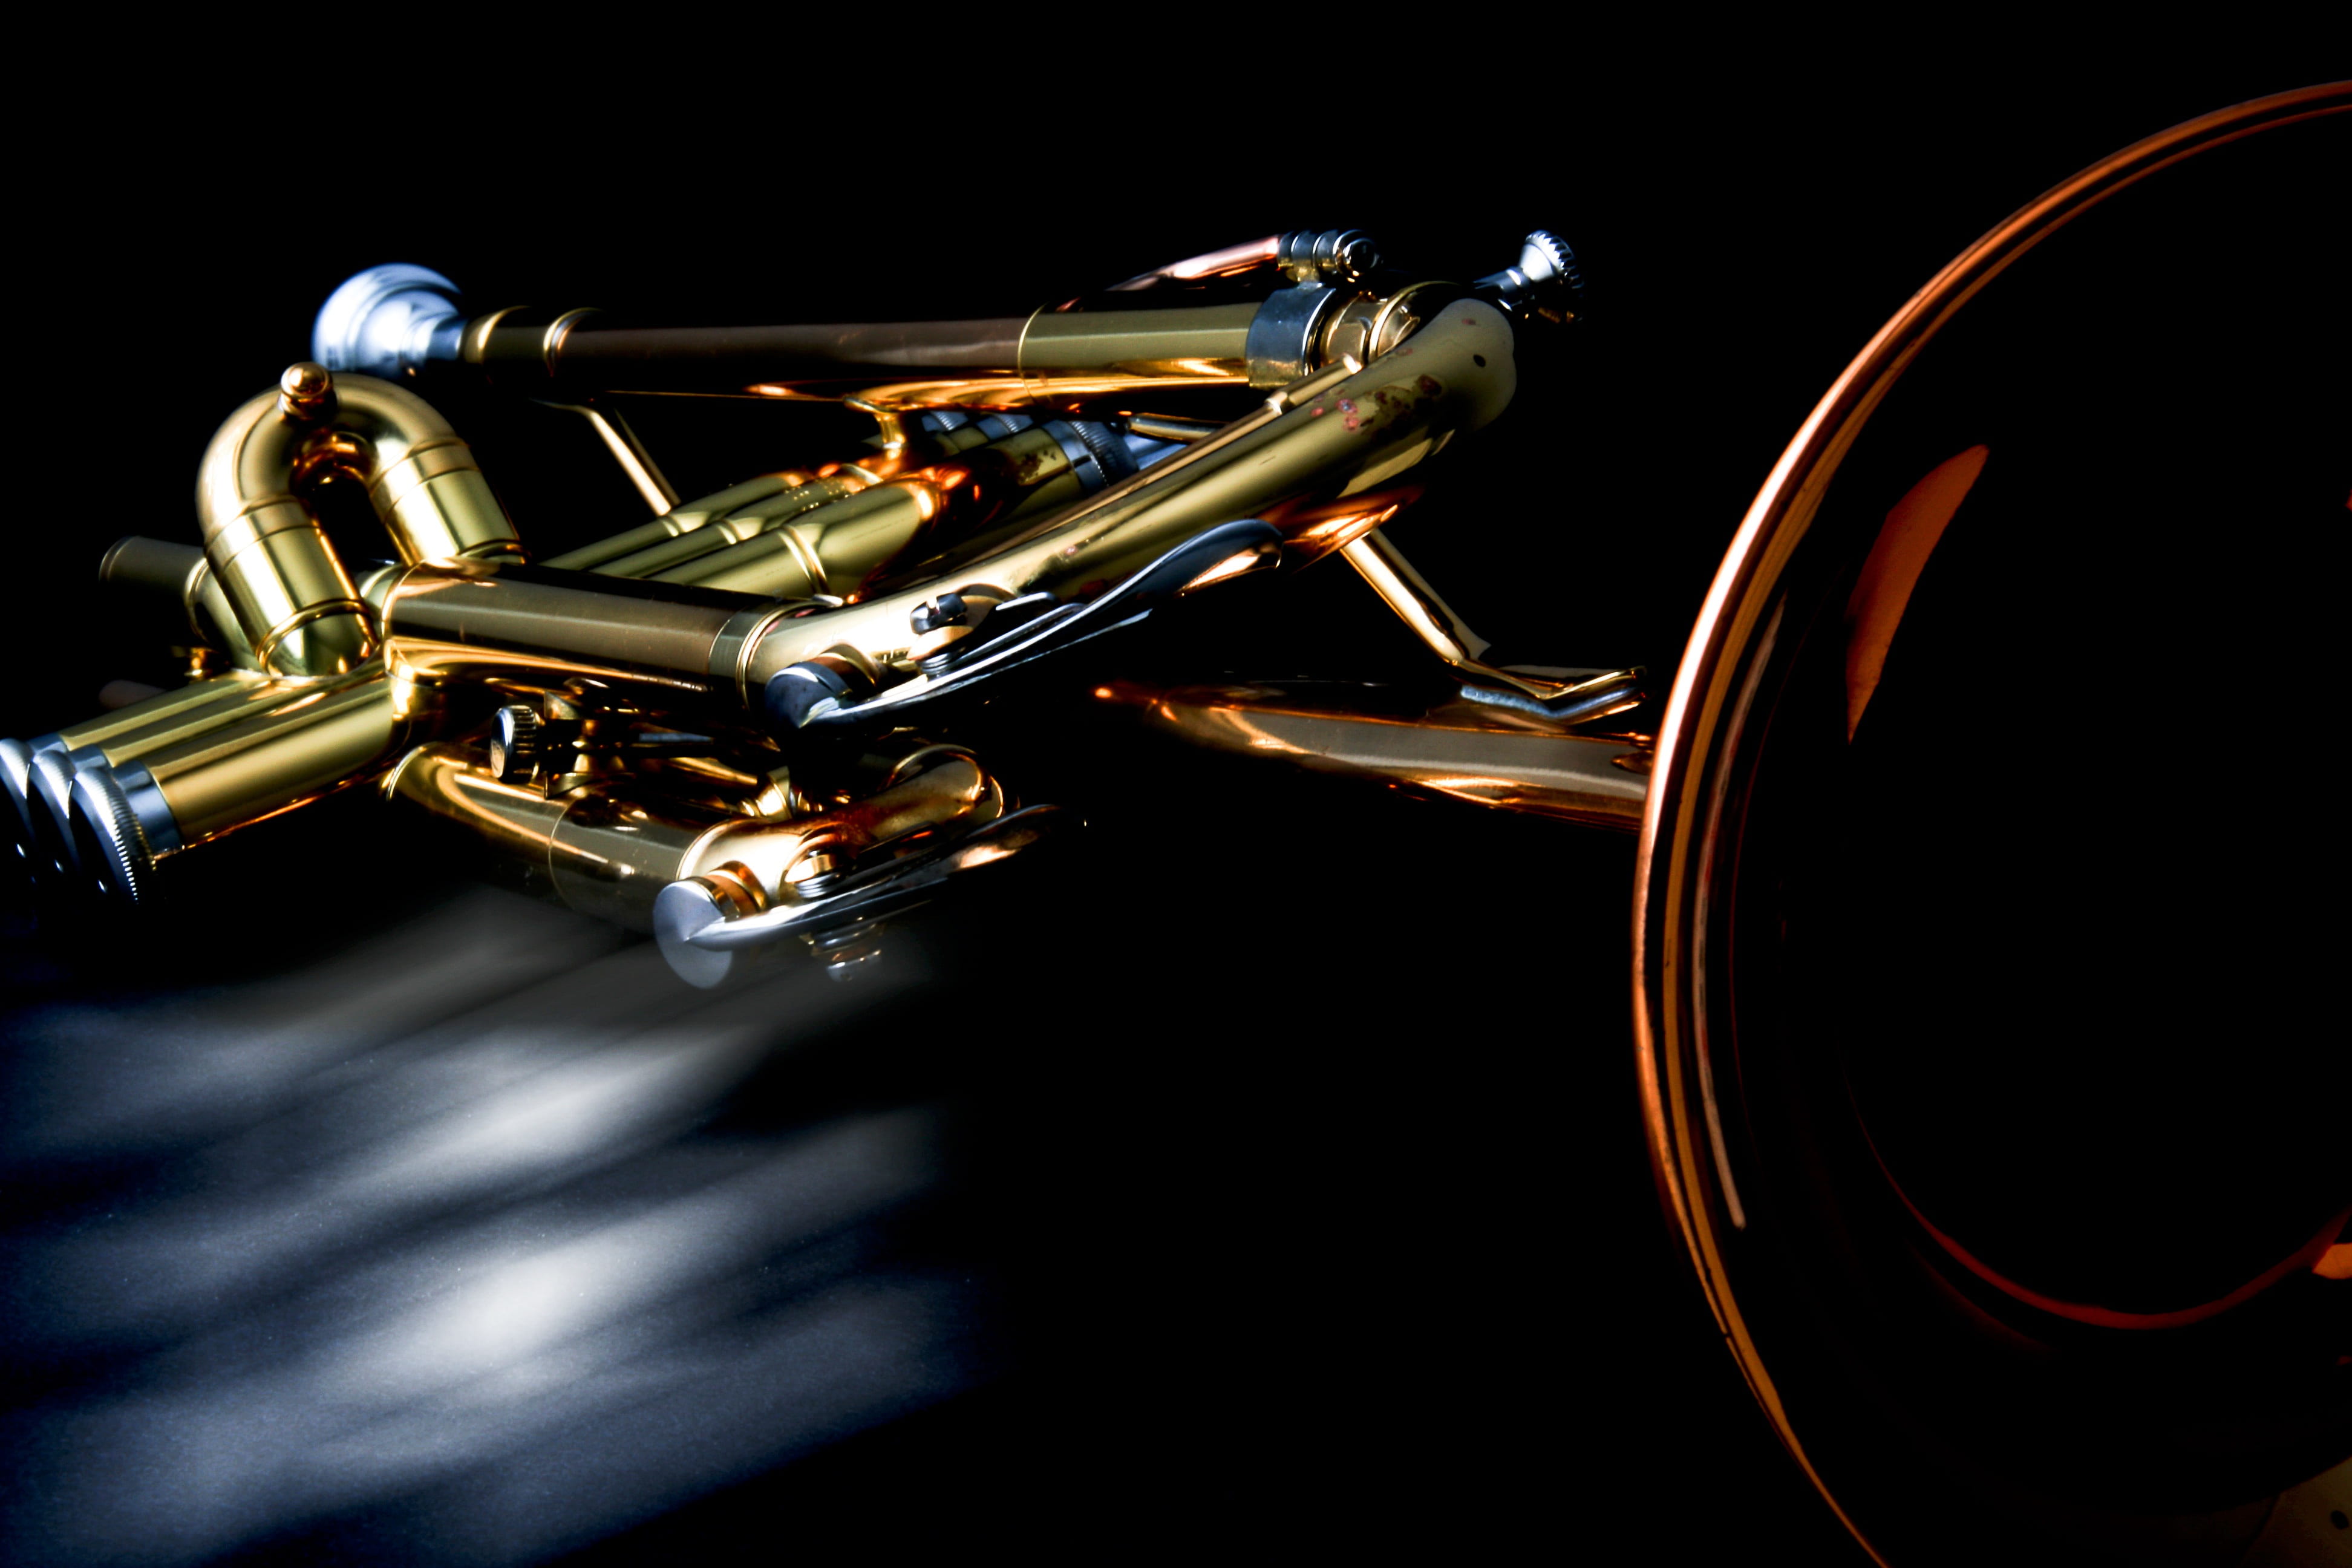 low-light closeup photo of brass-colored trumpet, musical instrument